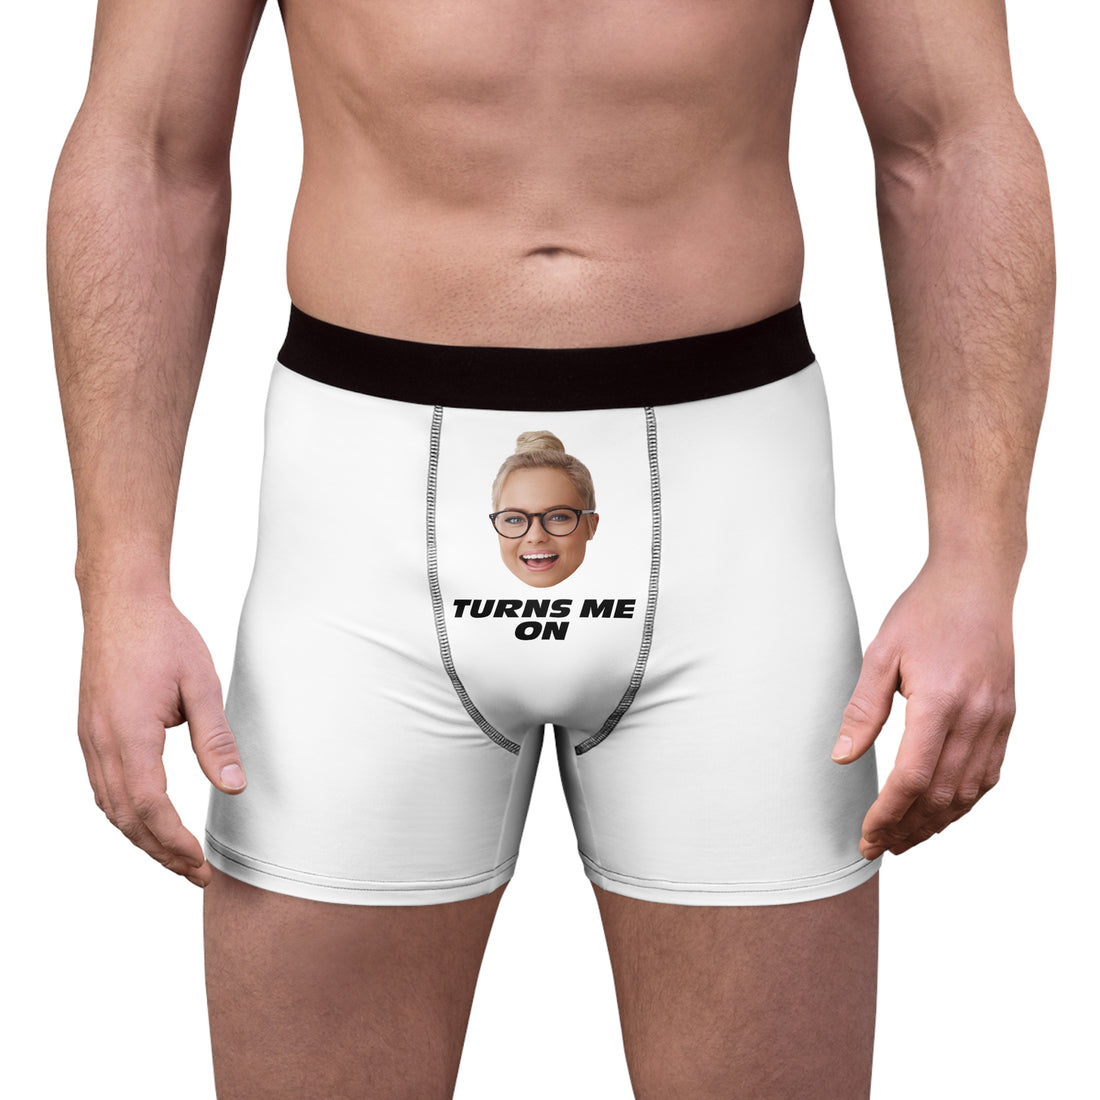 Spicy Personalized Boxers For Men With Face Photo